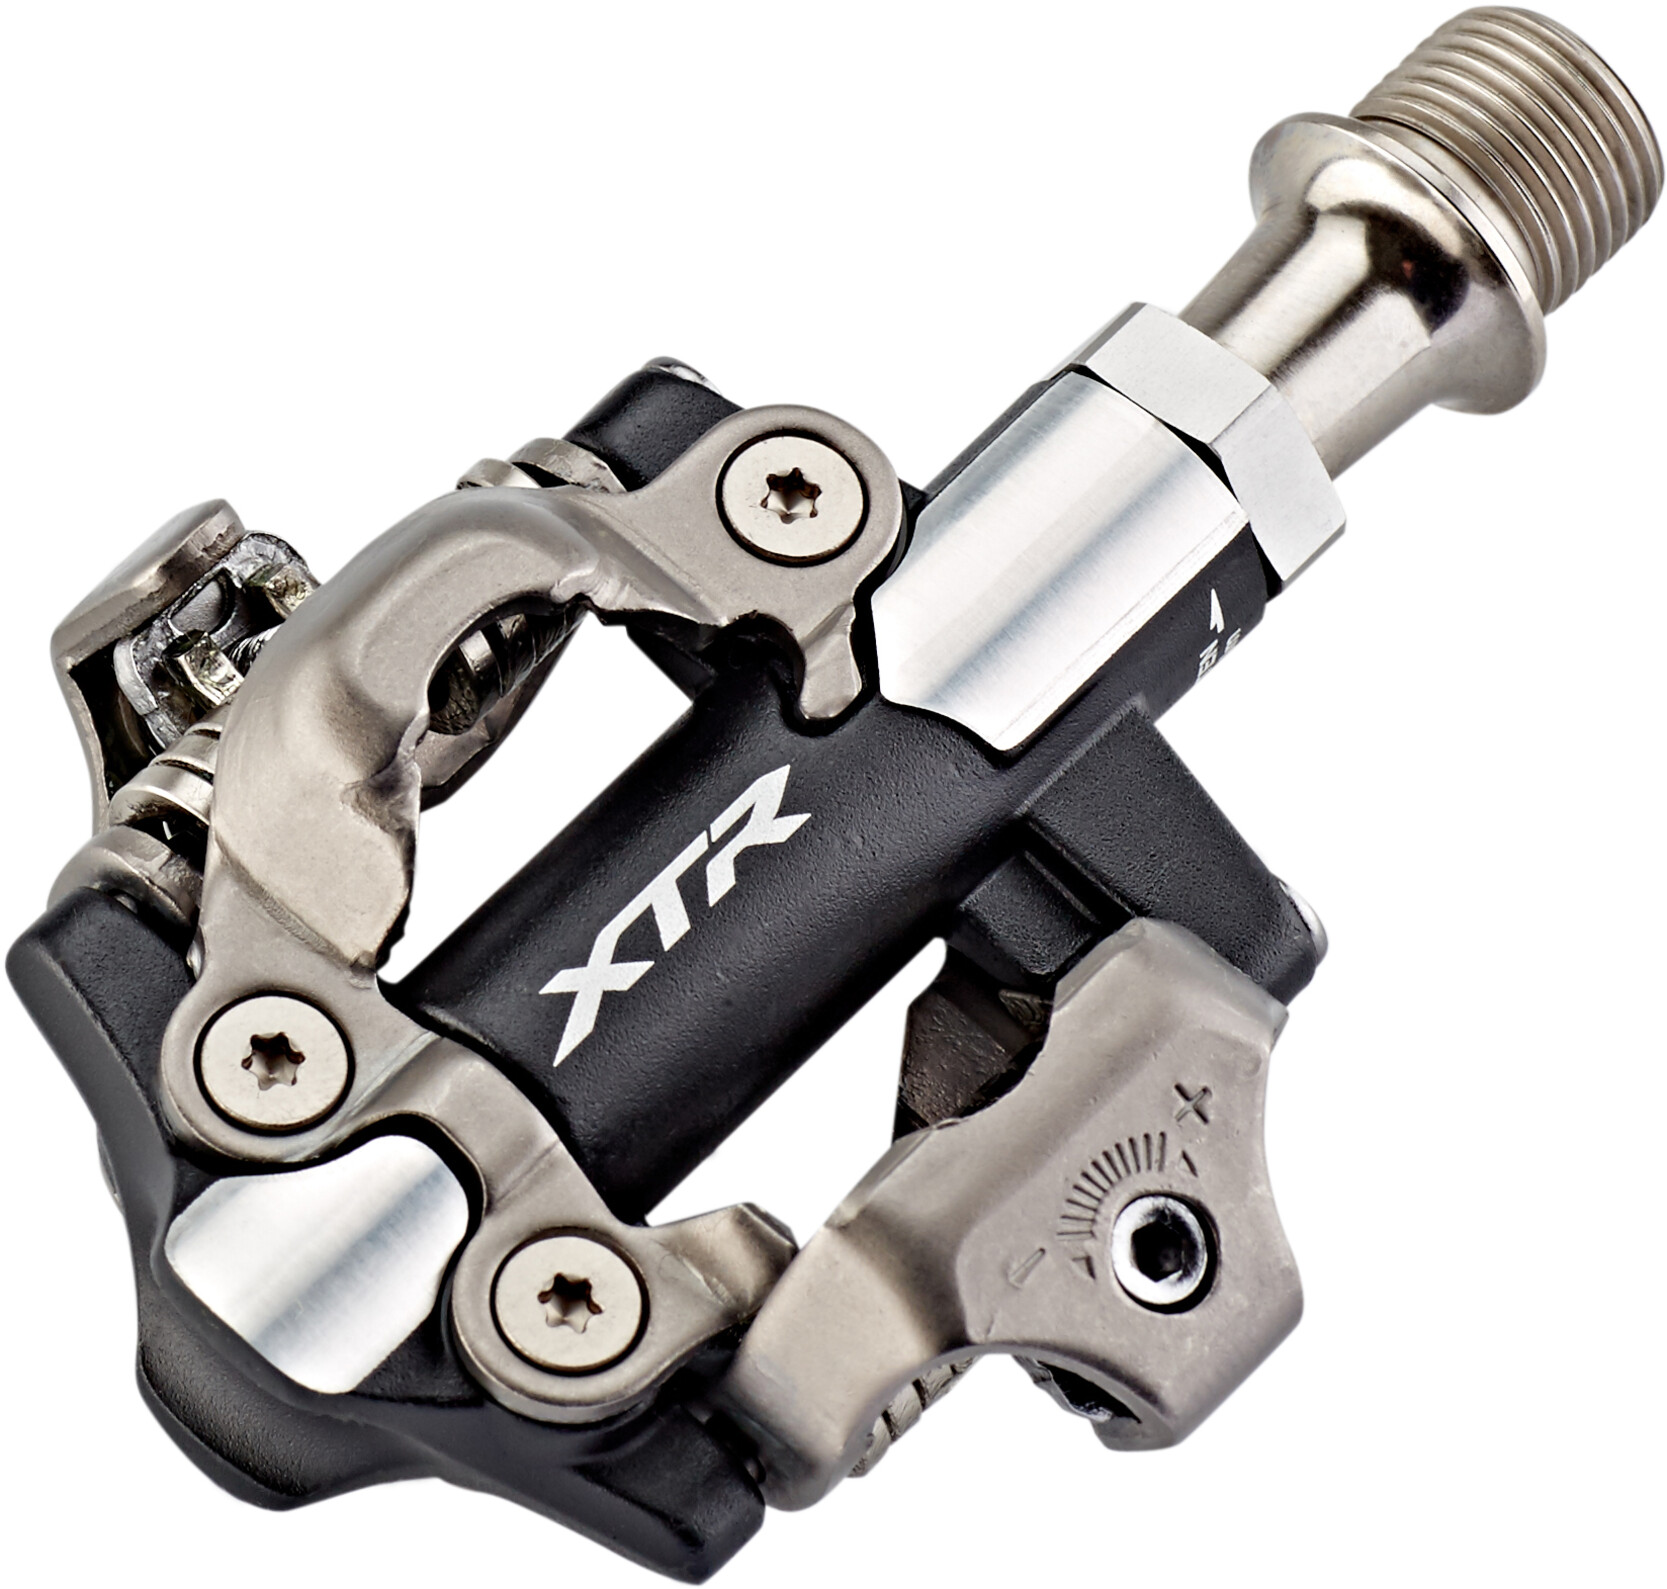 Shimano XTR PD-M9100 Pedale online bei Bikester.at